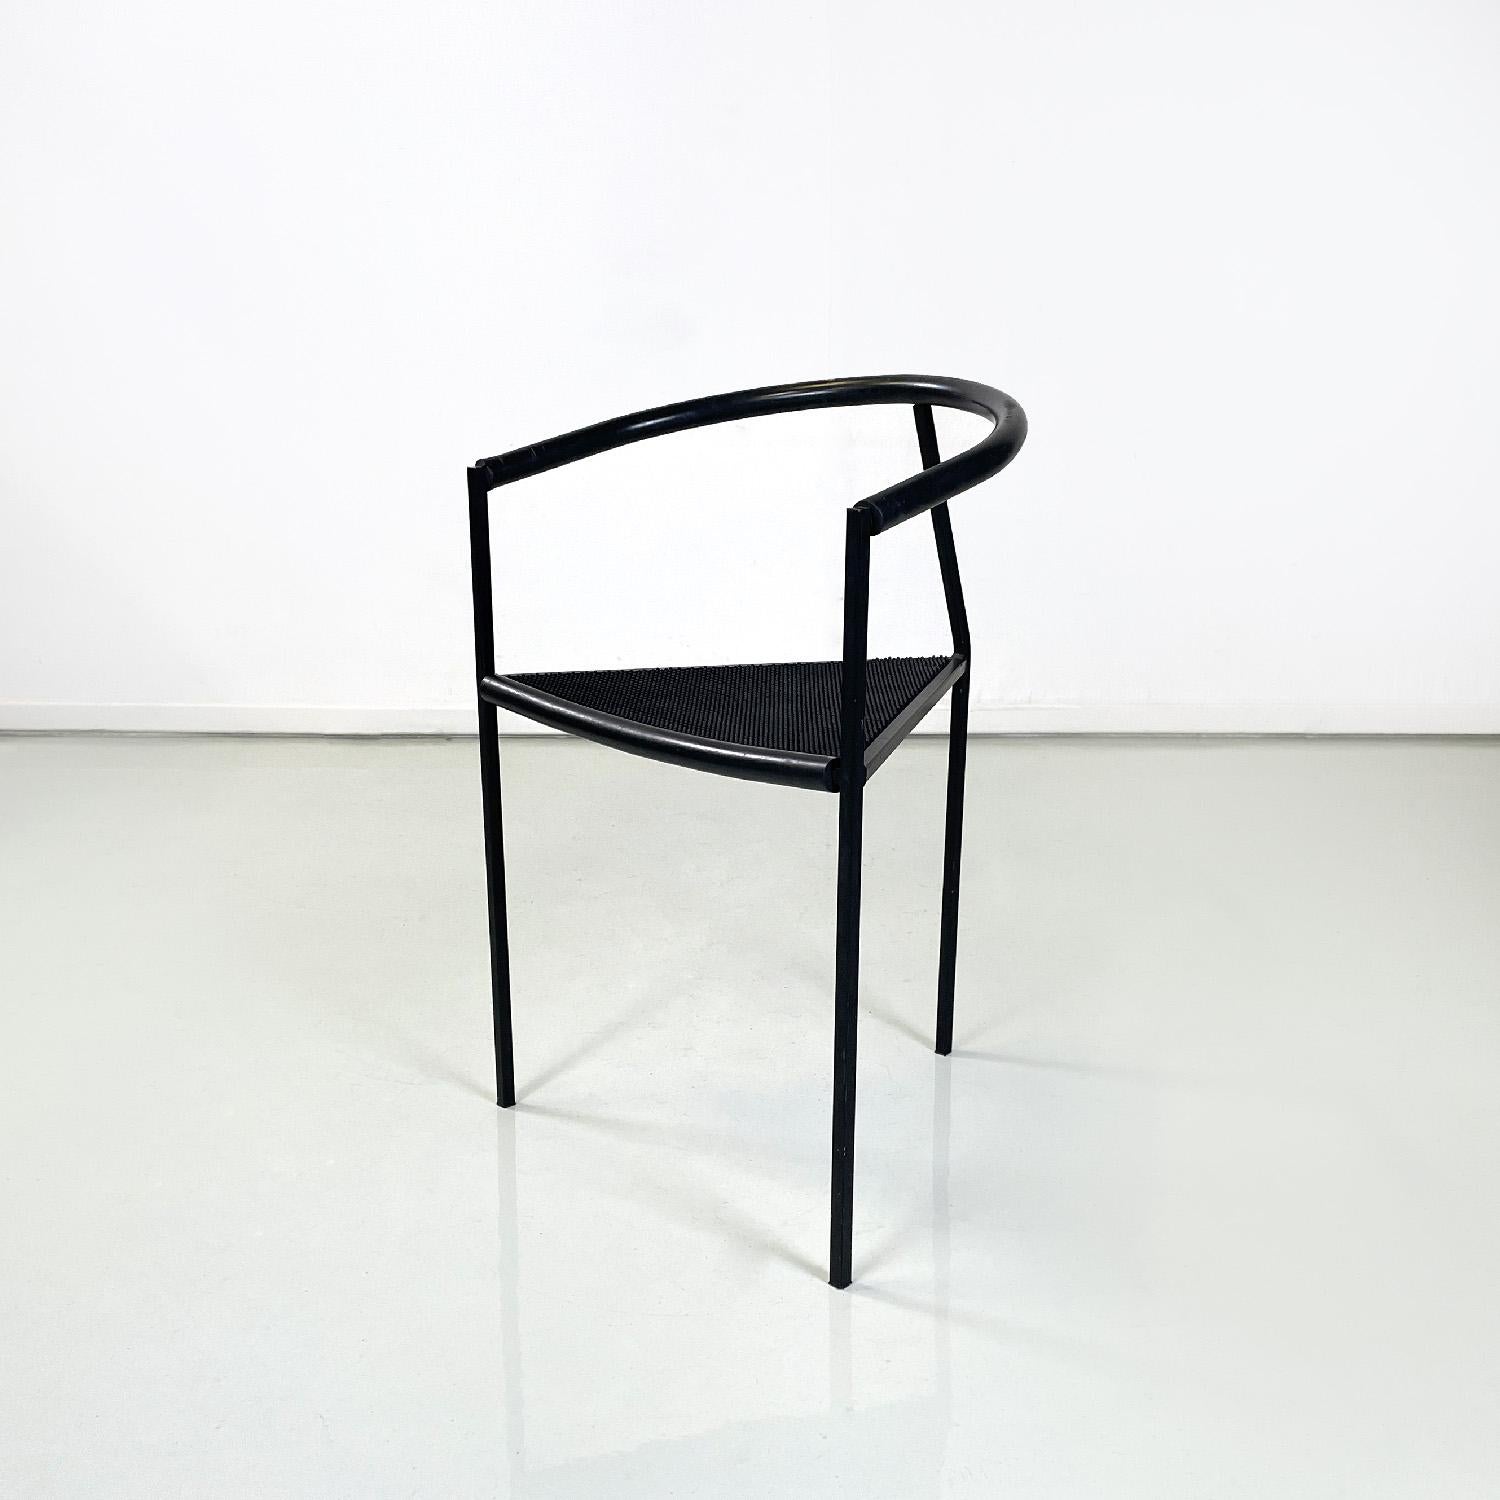 Late 20th Century Italian modern black metal rubber chairs by Peregalli Calatroni for Zeus, 1990s